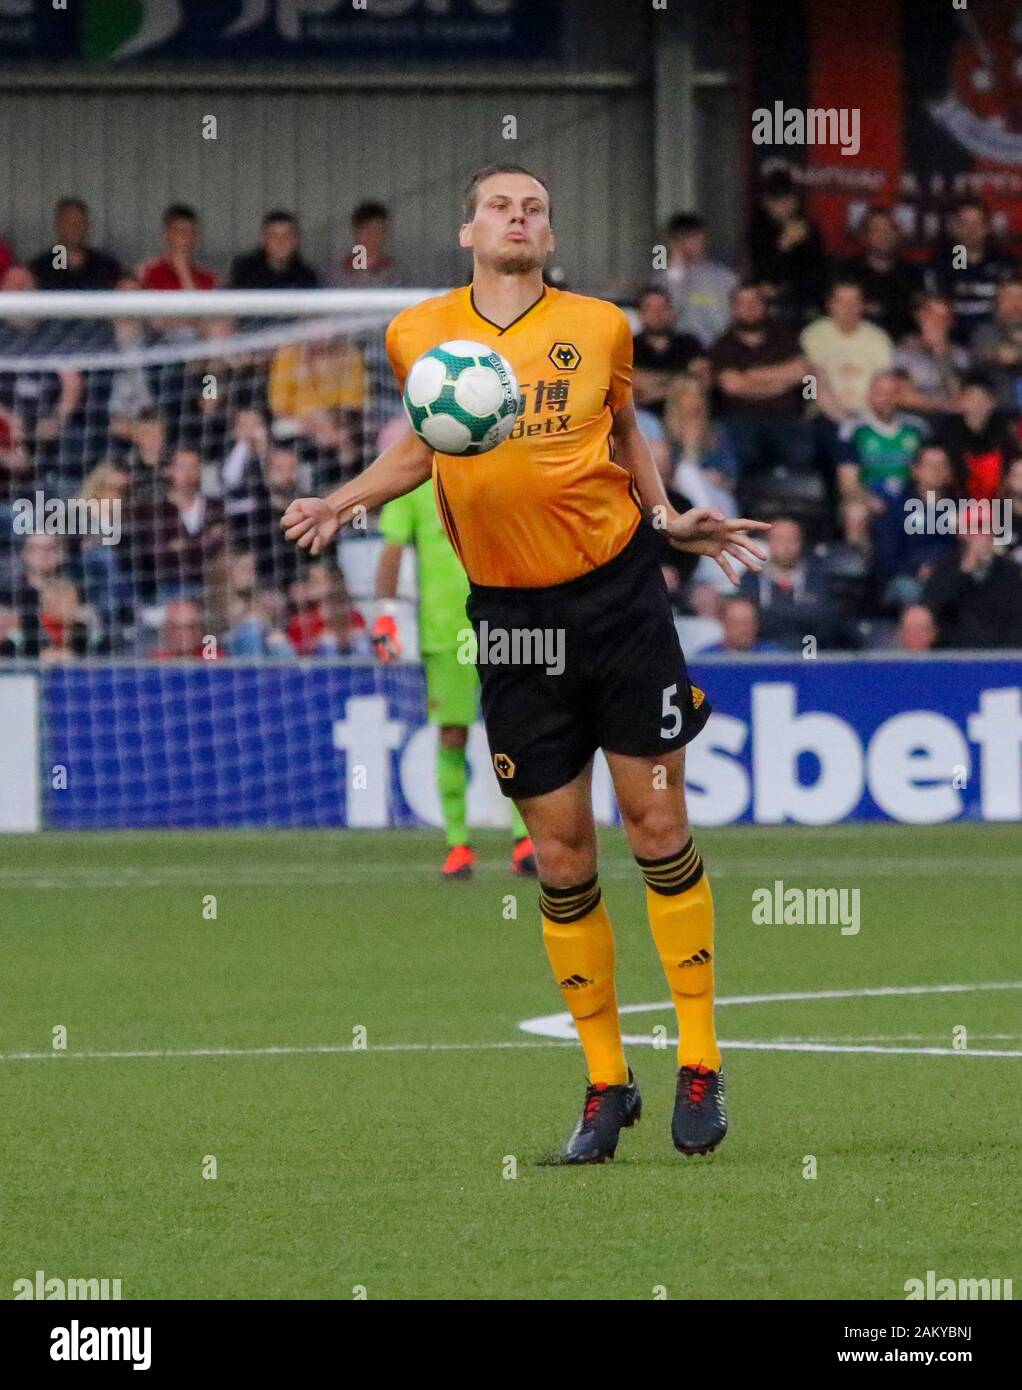 Seaview Stadium, Belfast, Northern Ireland. 01st Aug, 2019. UEFA Europa League Second Qualifying Round (Second Leg) Crusaders (red/black) v Wolves. Wolverhampton Wanderers player Ryan Bennett (5) in action. Stock Photo